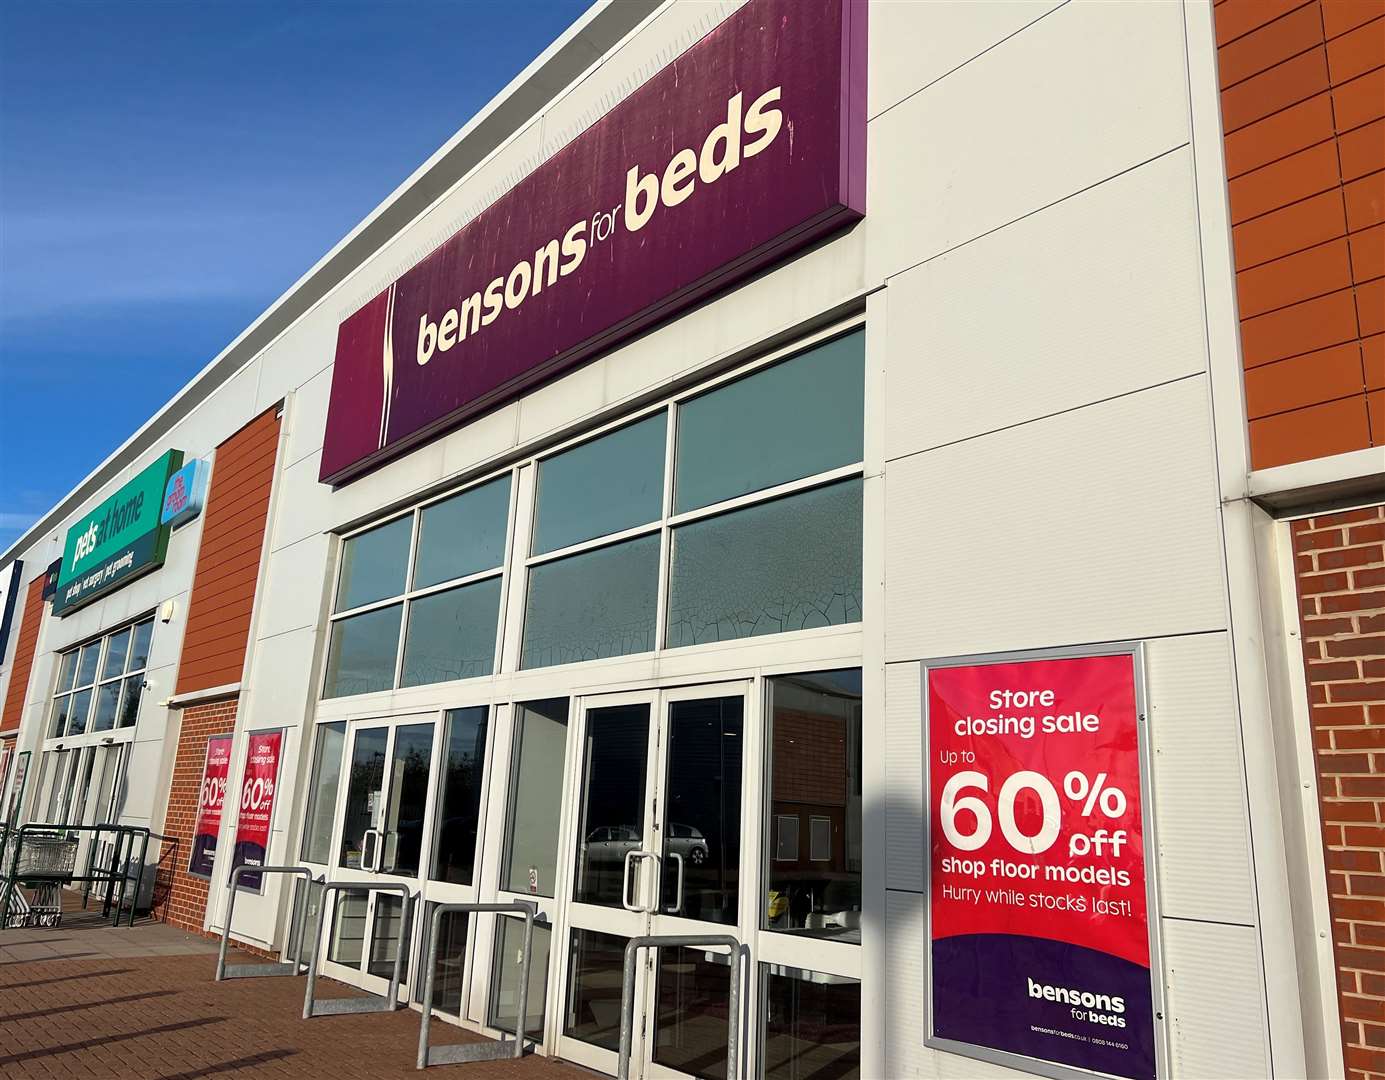 Bensons for Beds in Sittingbourne Retail Park closed last year